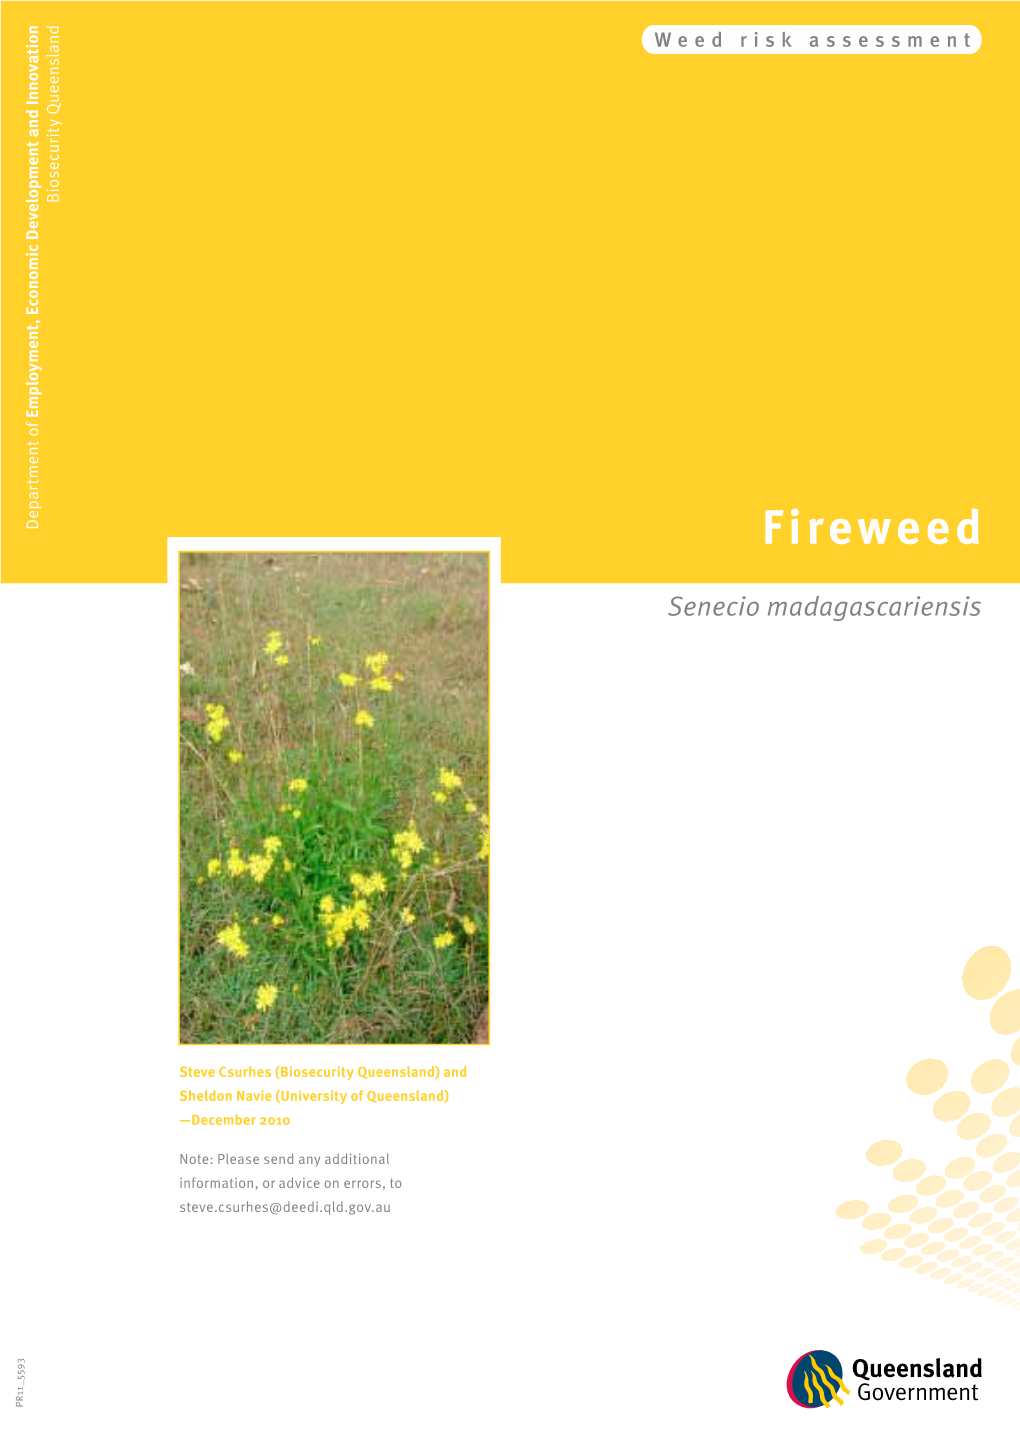 Fireweed Risk Assessment